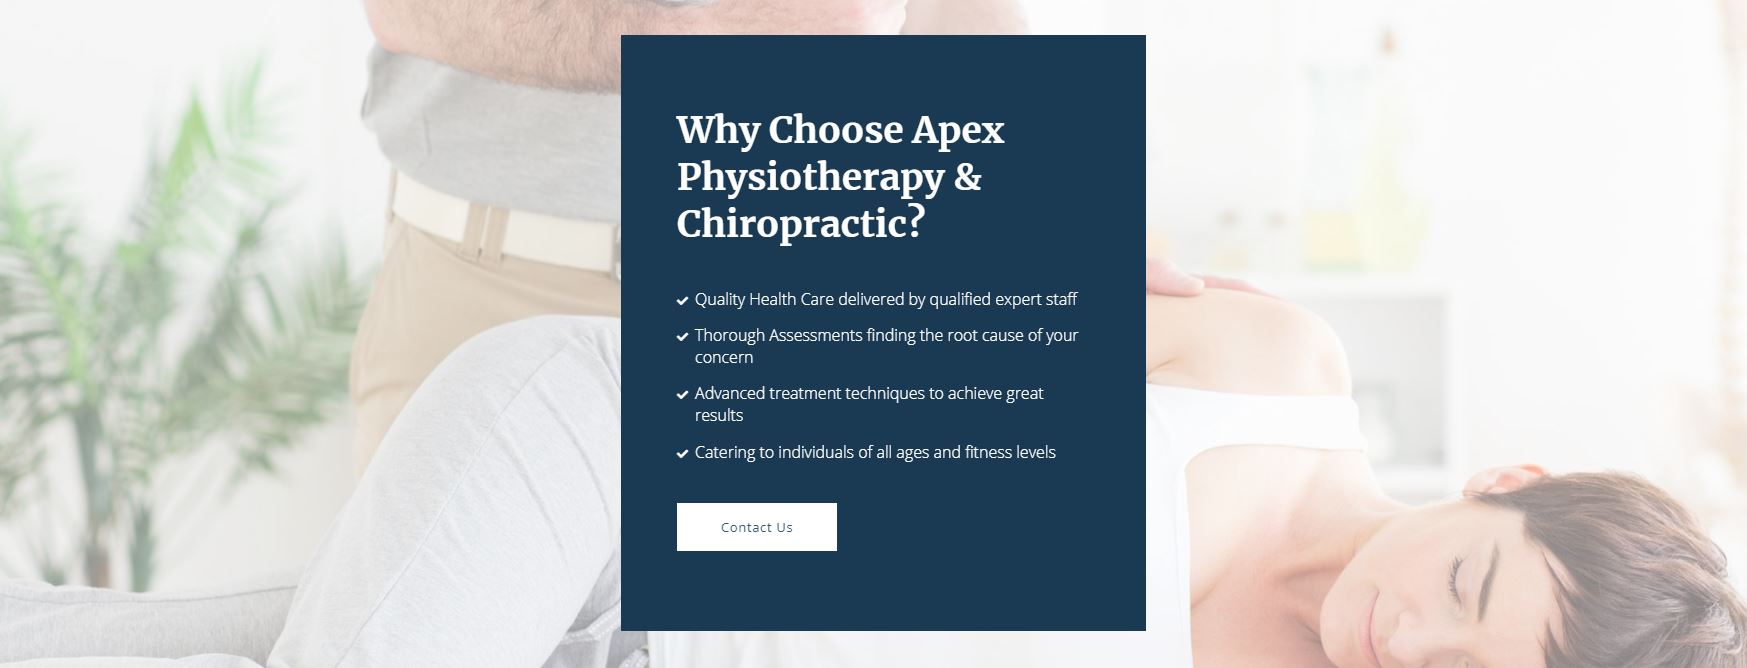 Apex Physiotherapy & Chiropractic